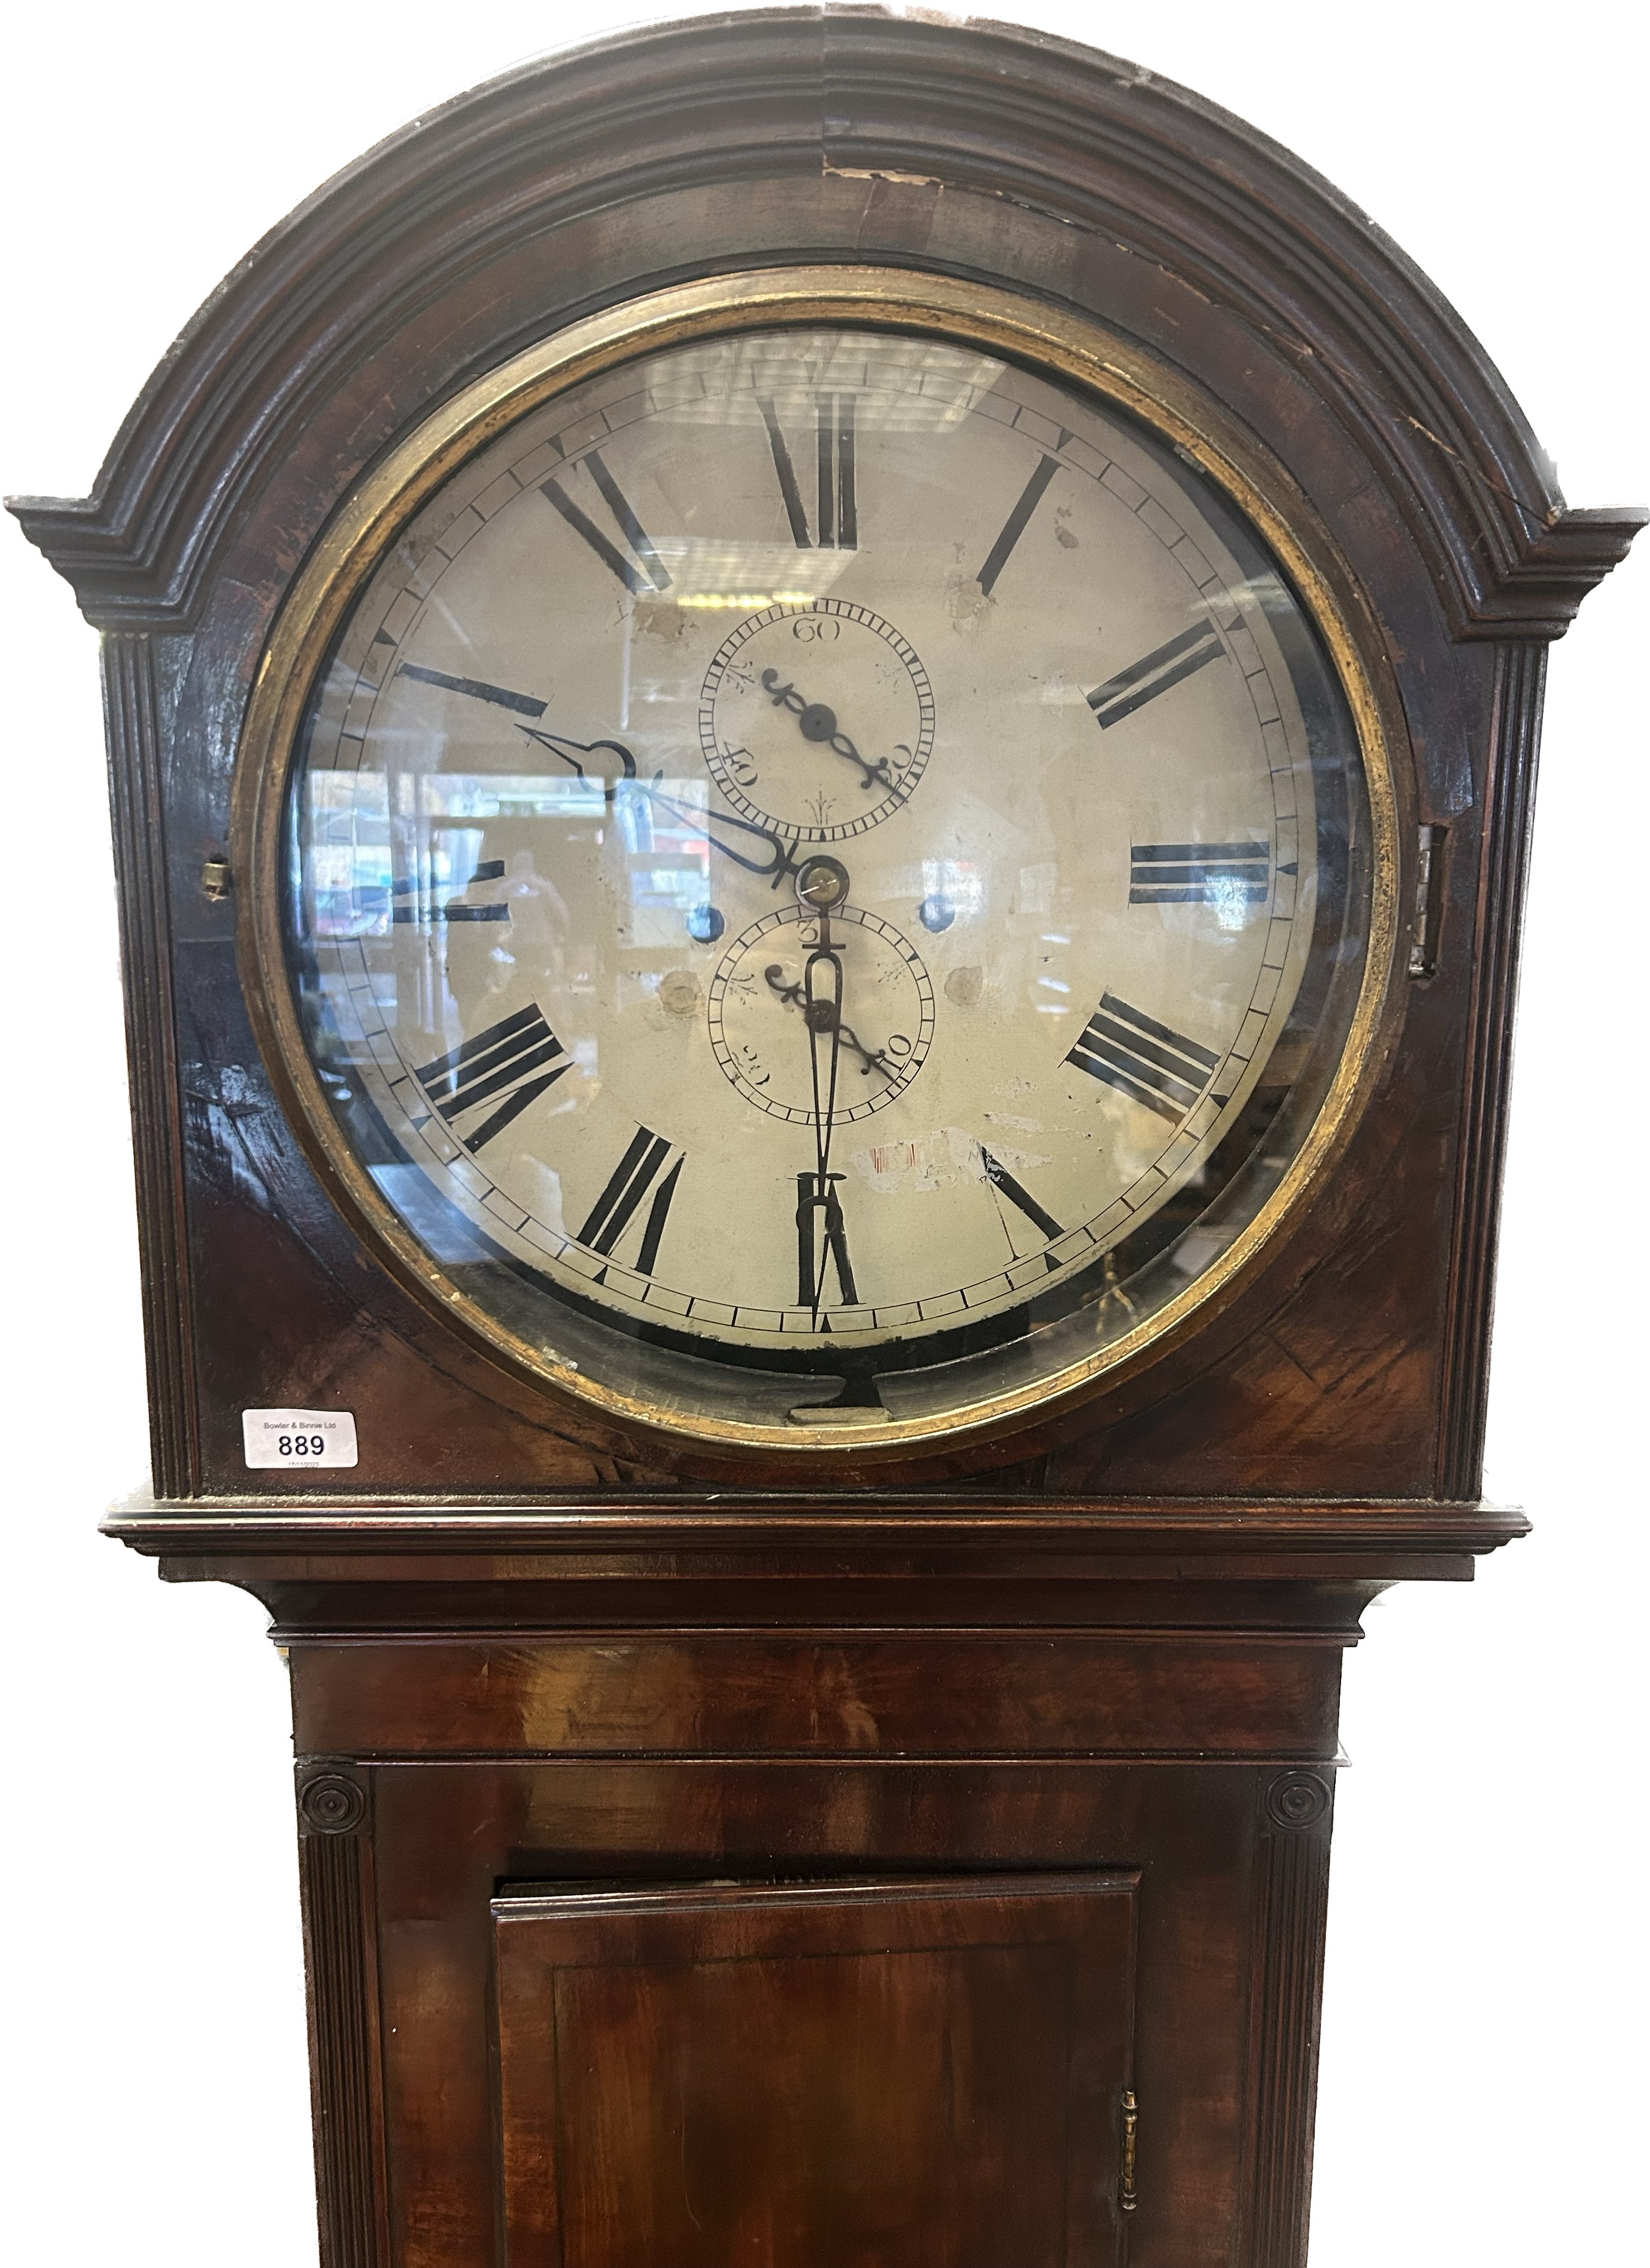 19th century dome top grandfather clock; comes with weights and pendulum. [204cm high] - Image 2 of 4